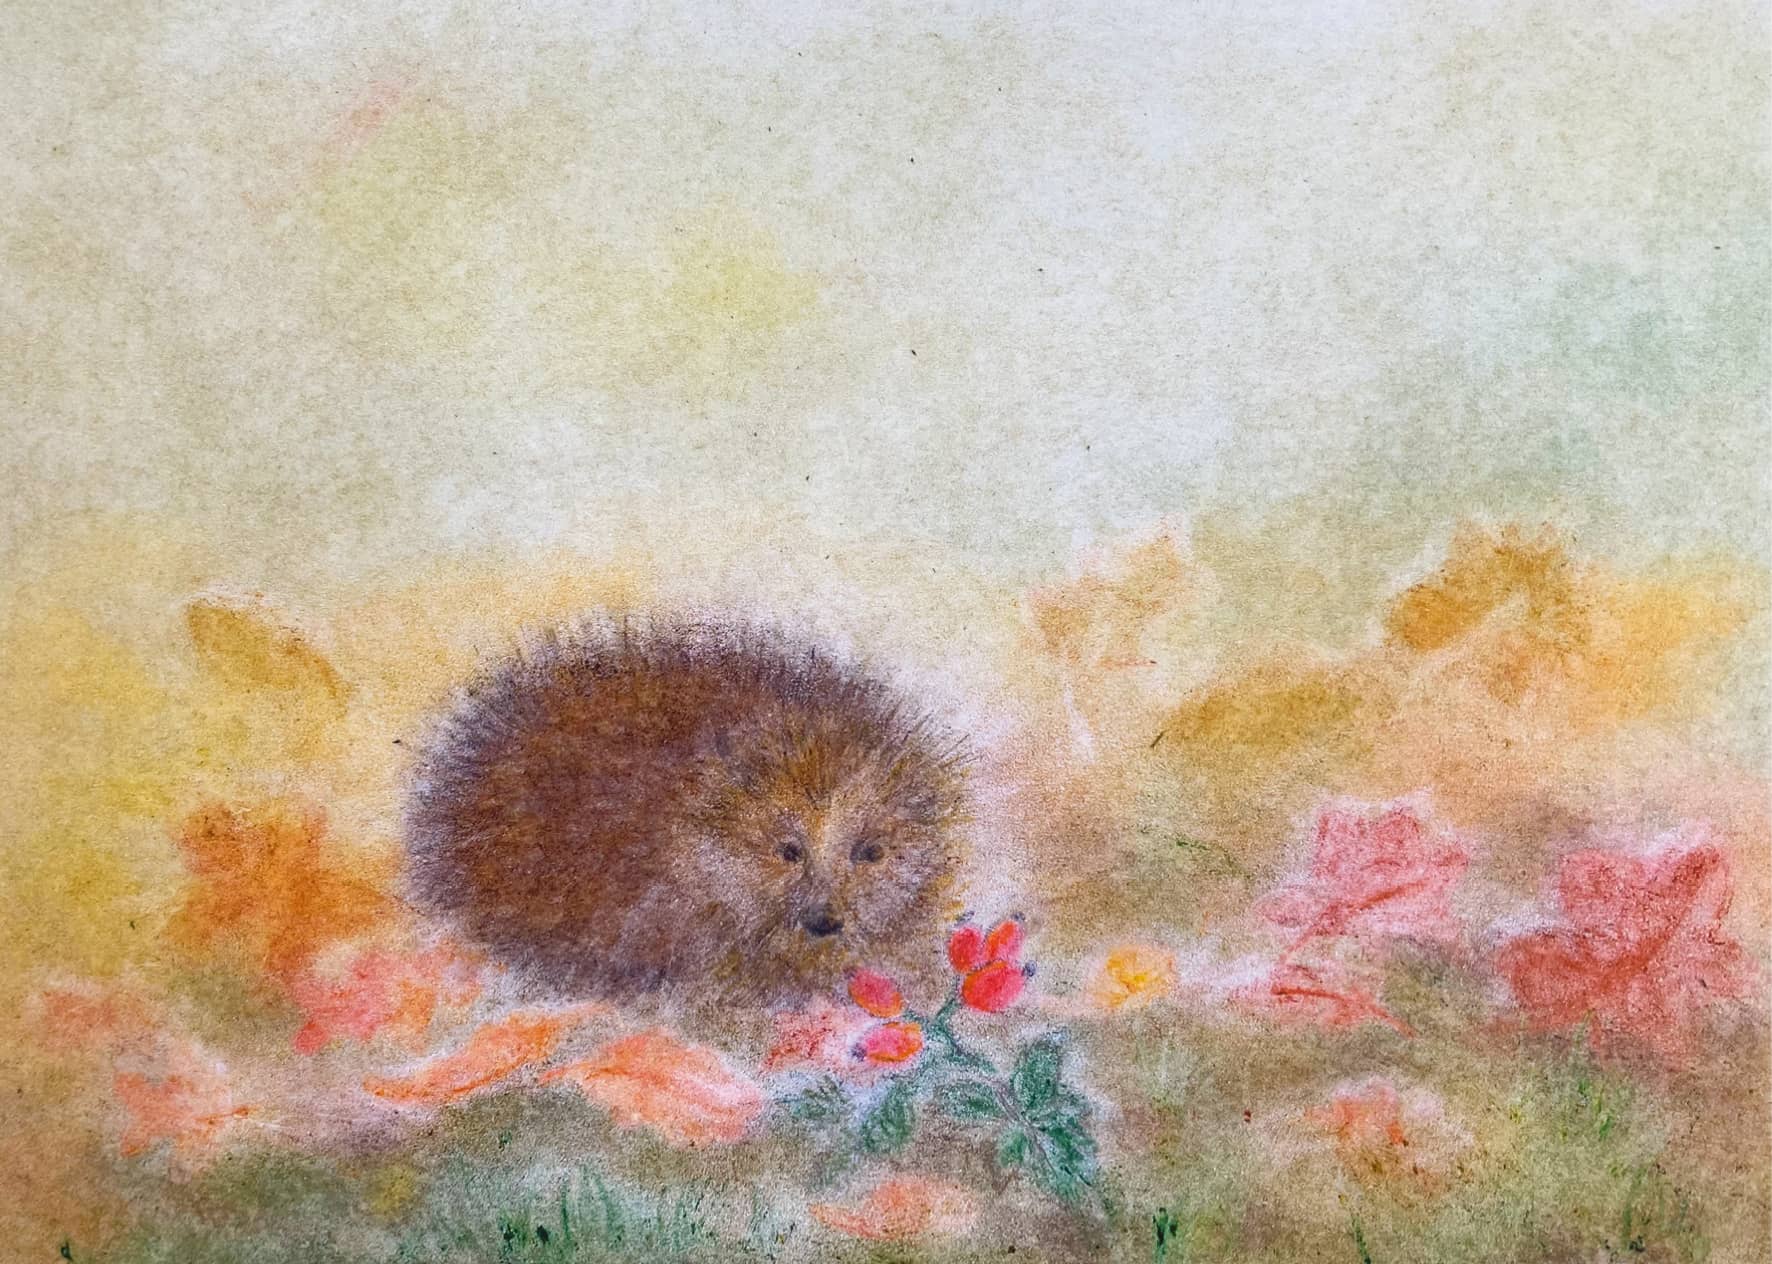 Seccorell postcard "Hedgehog in autumn" with a cute hedgehog surrounded by colorful leaves and rose hips.